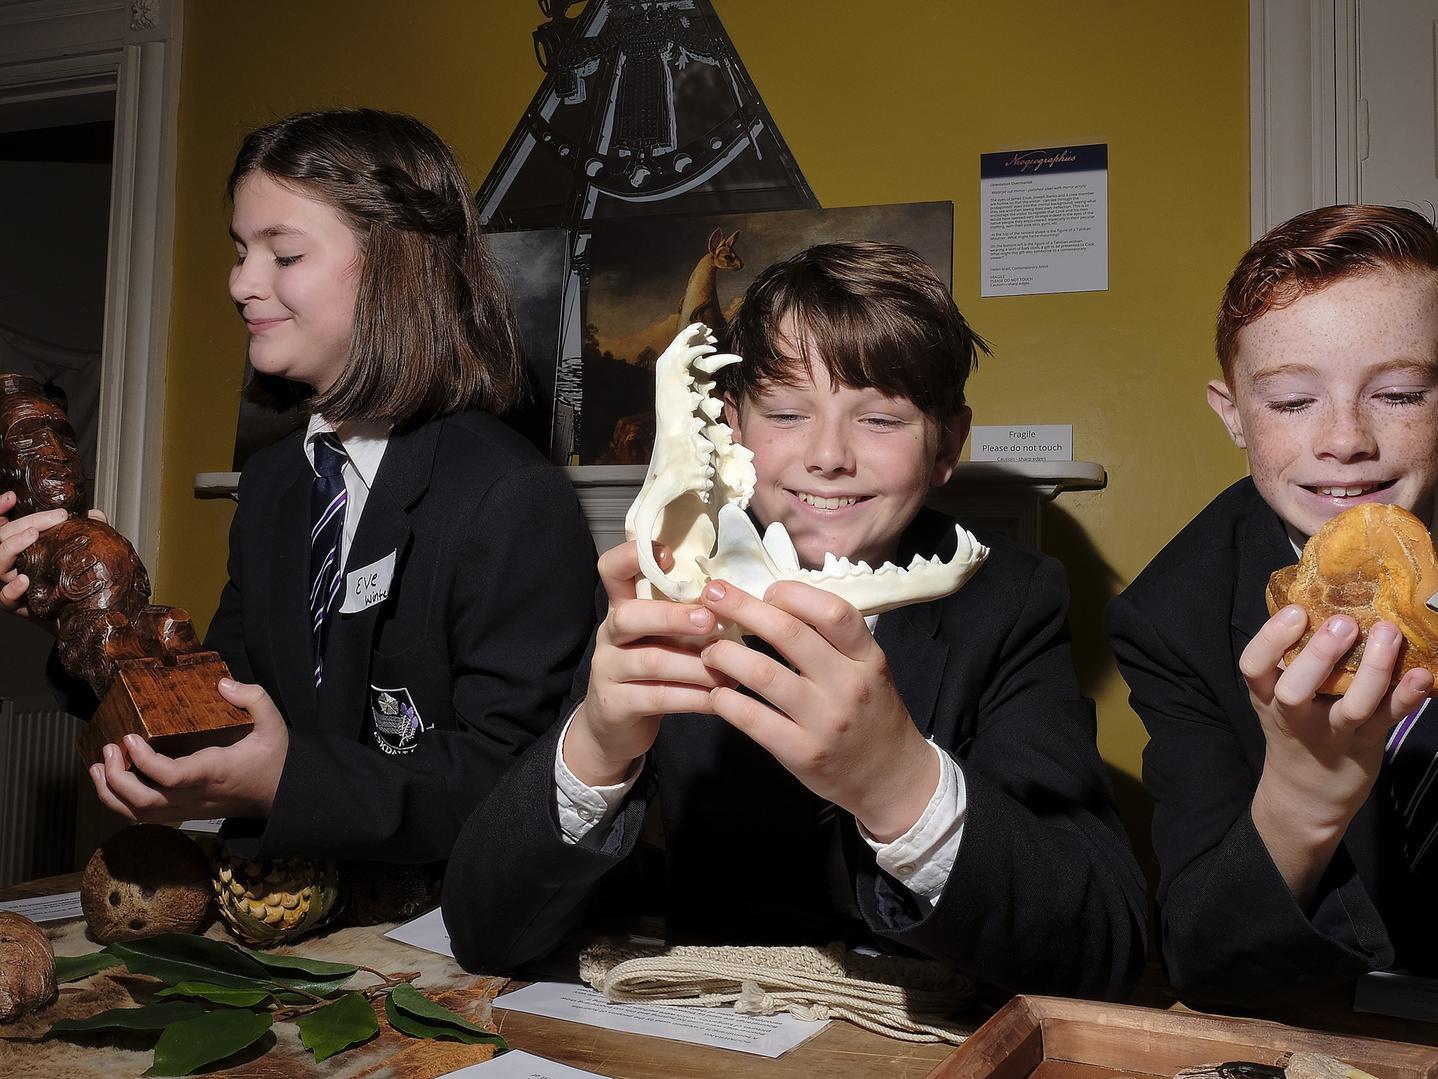 Students Eve, Finley and Marcus have some hands-on experience with artefacts, 1950140c.